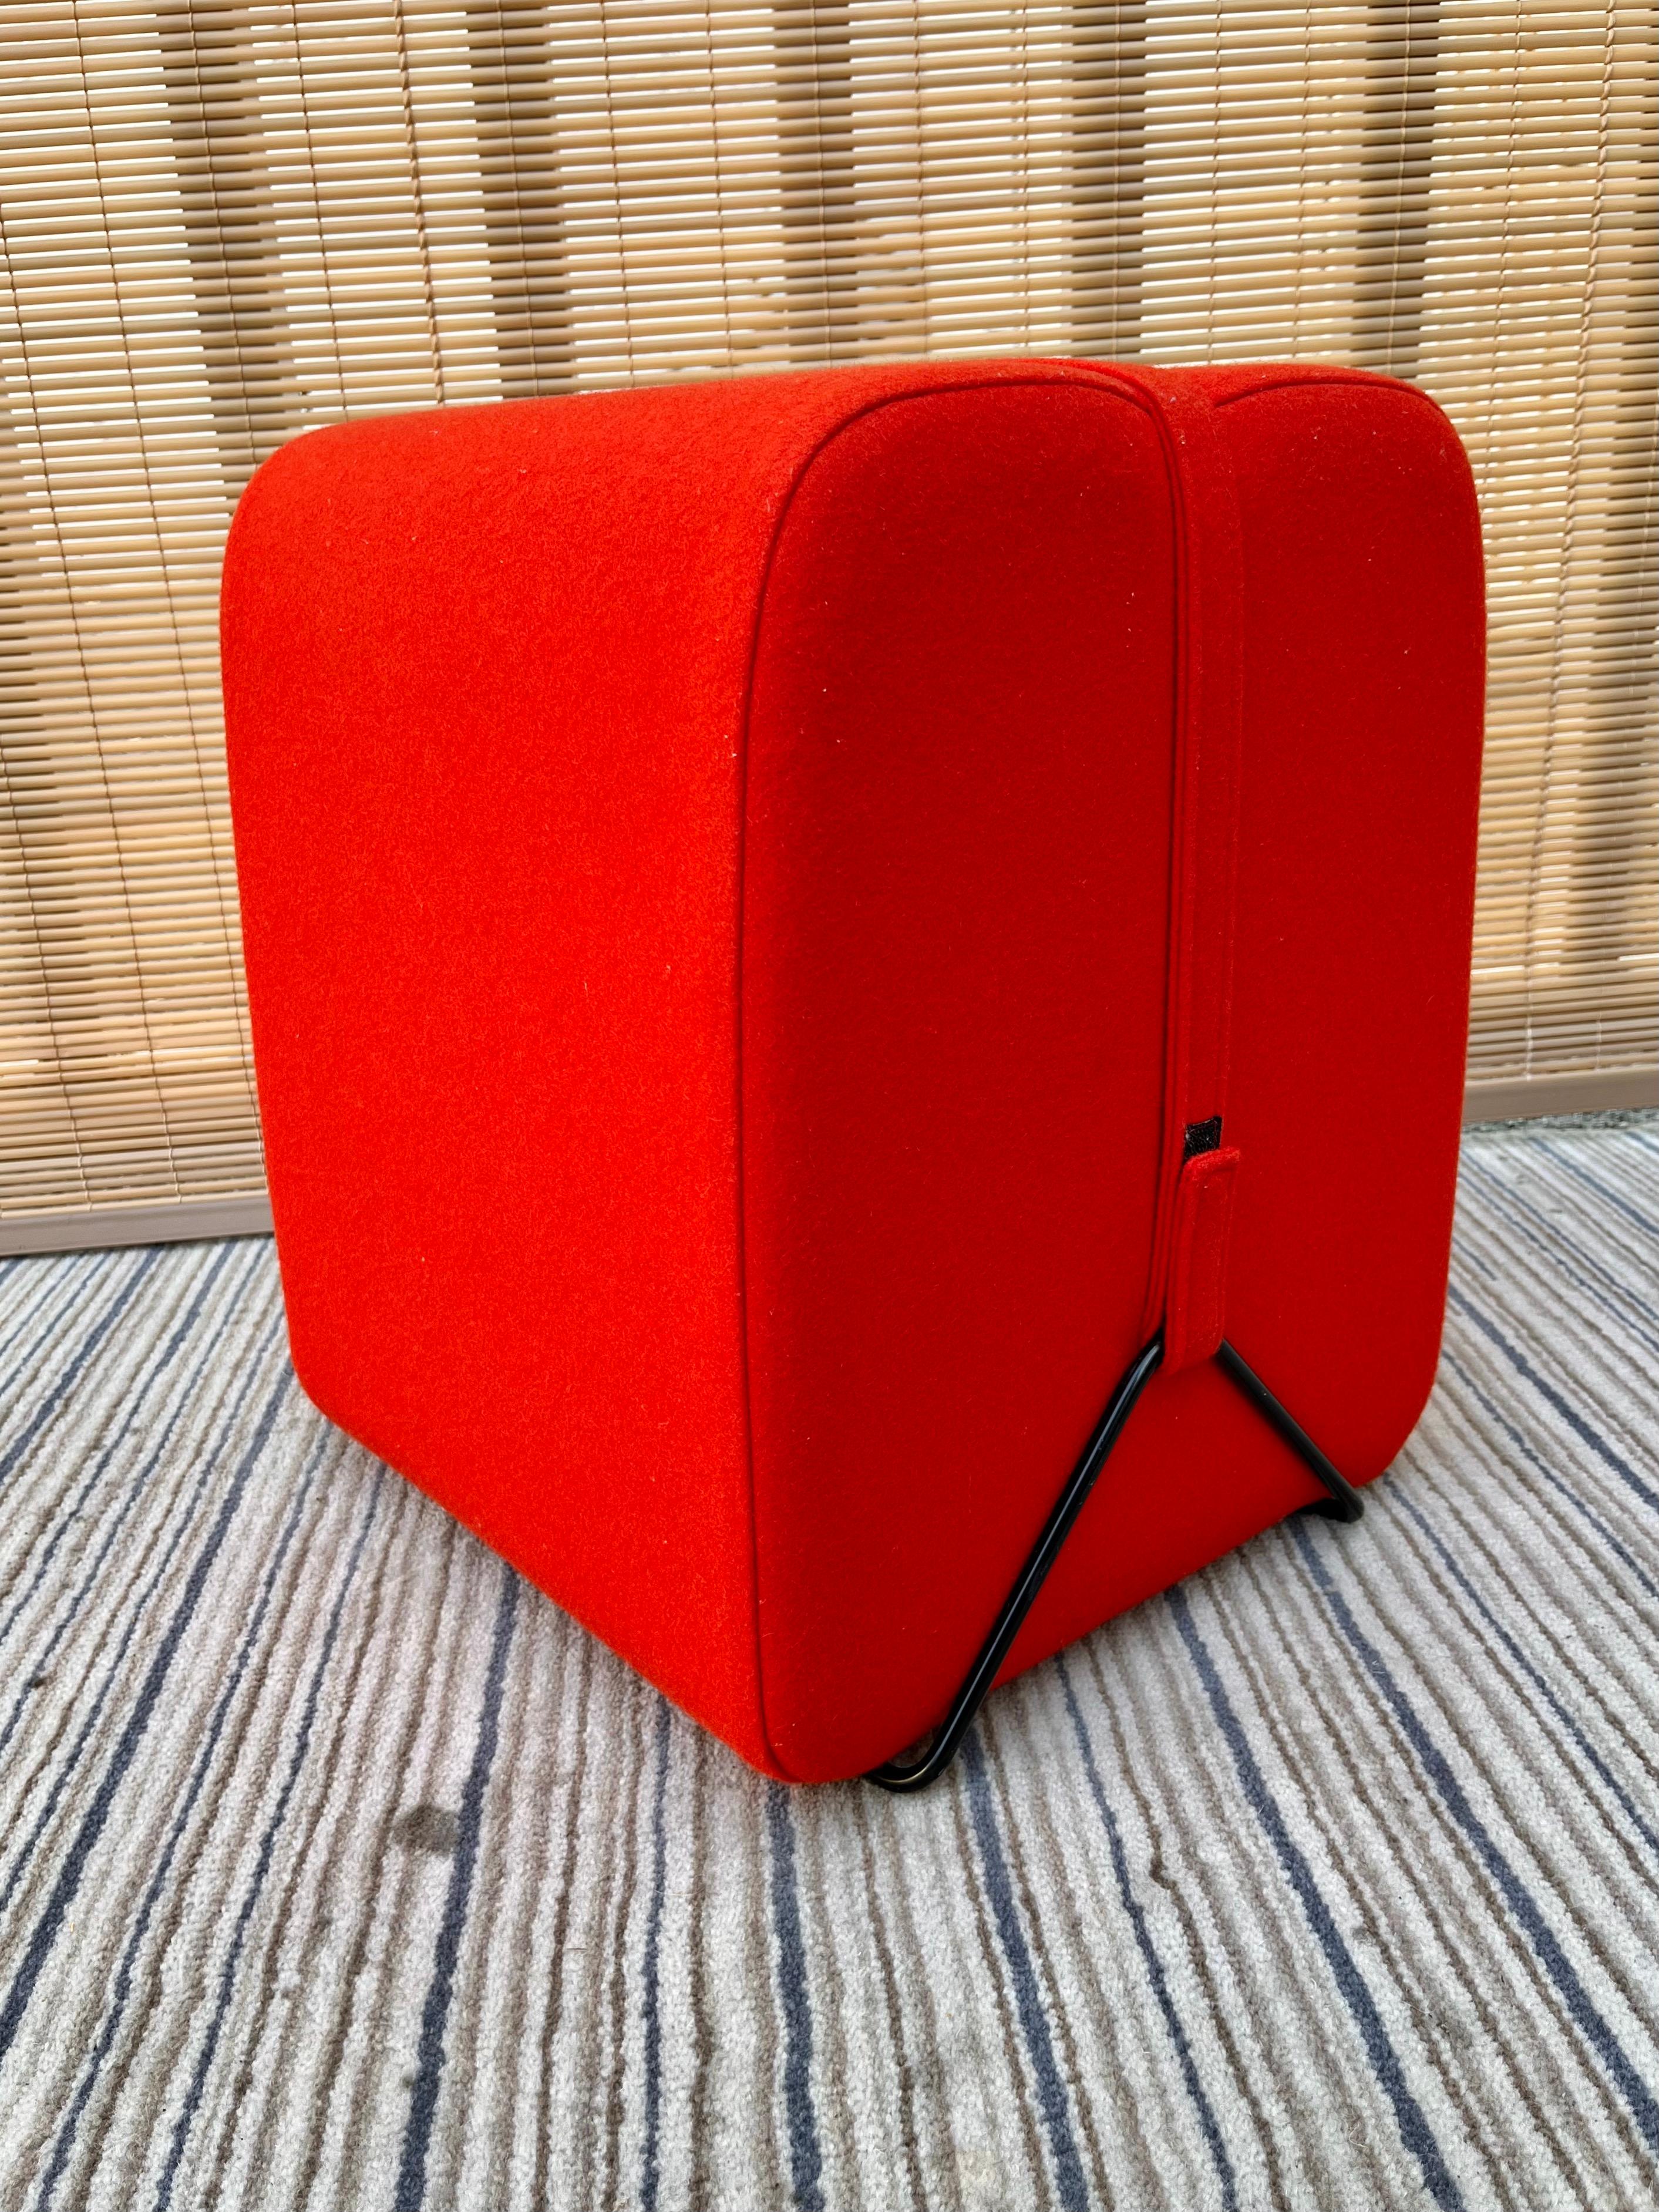 Modern Contemporary Mobidec Footstool by Pierre Charpin for Ligne Roset